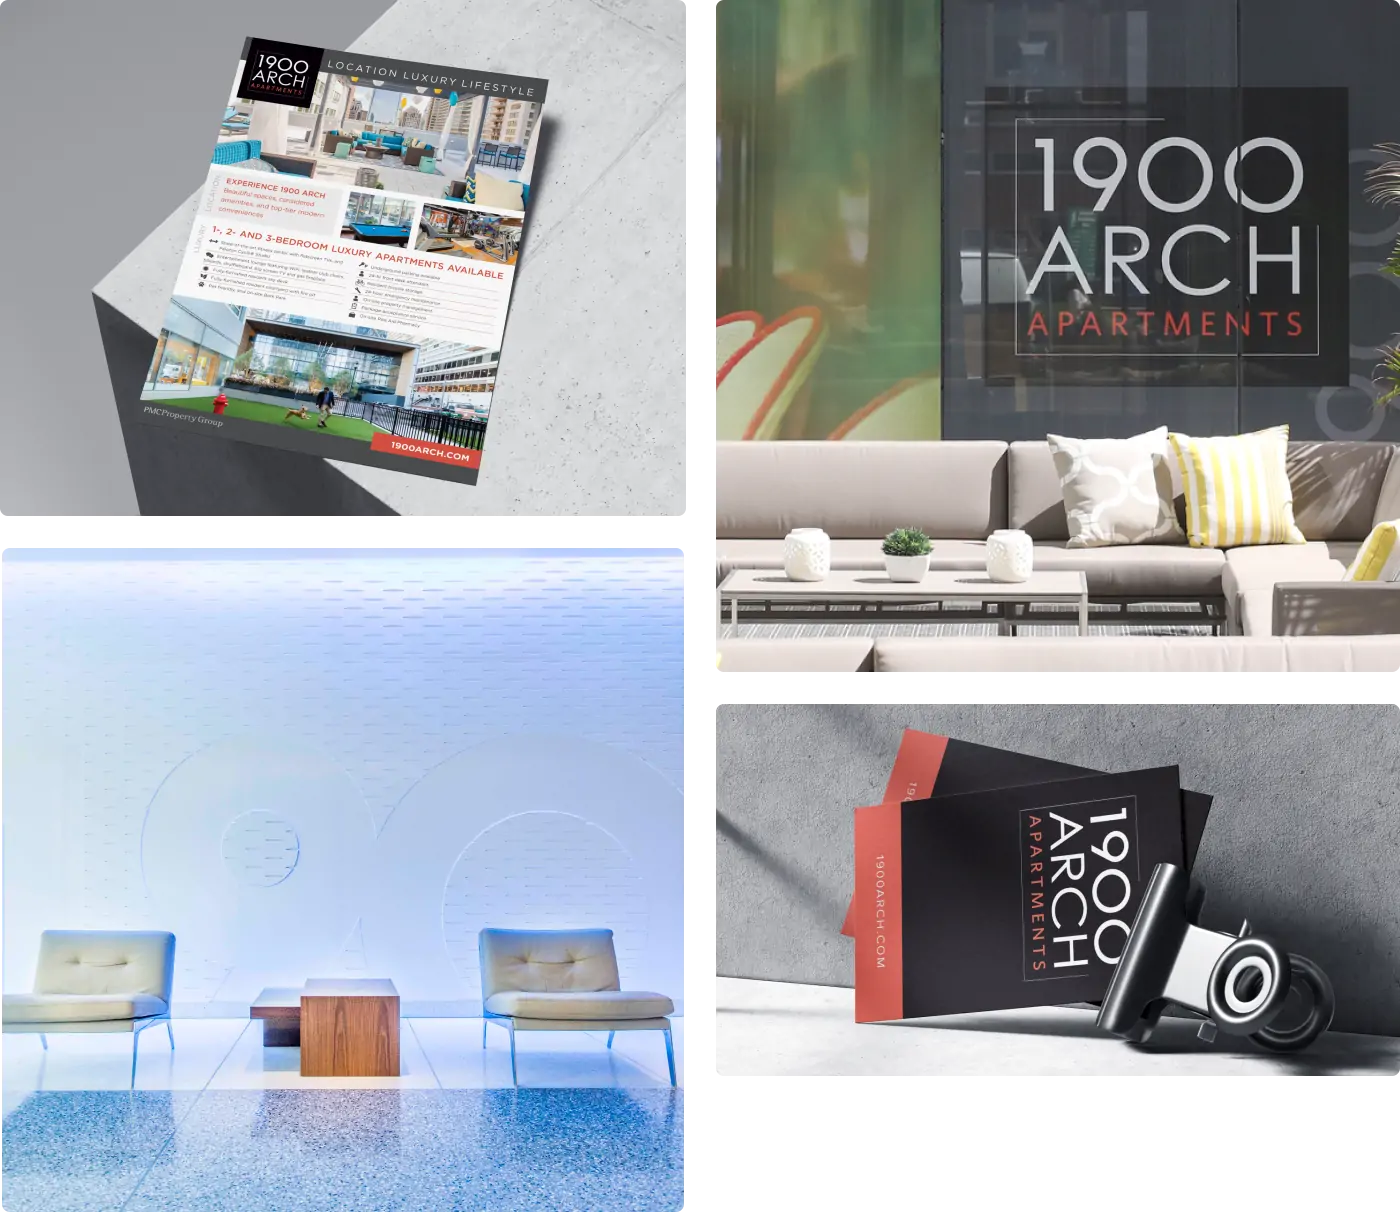 Collage of redesign for 1900 Arch Aparments featured on a flyer, their new logo, set into the wall of their lobby, and redesigned business cards.